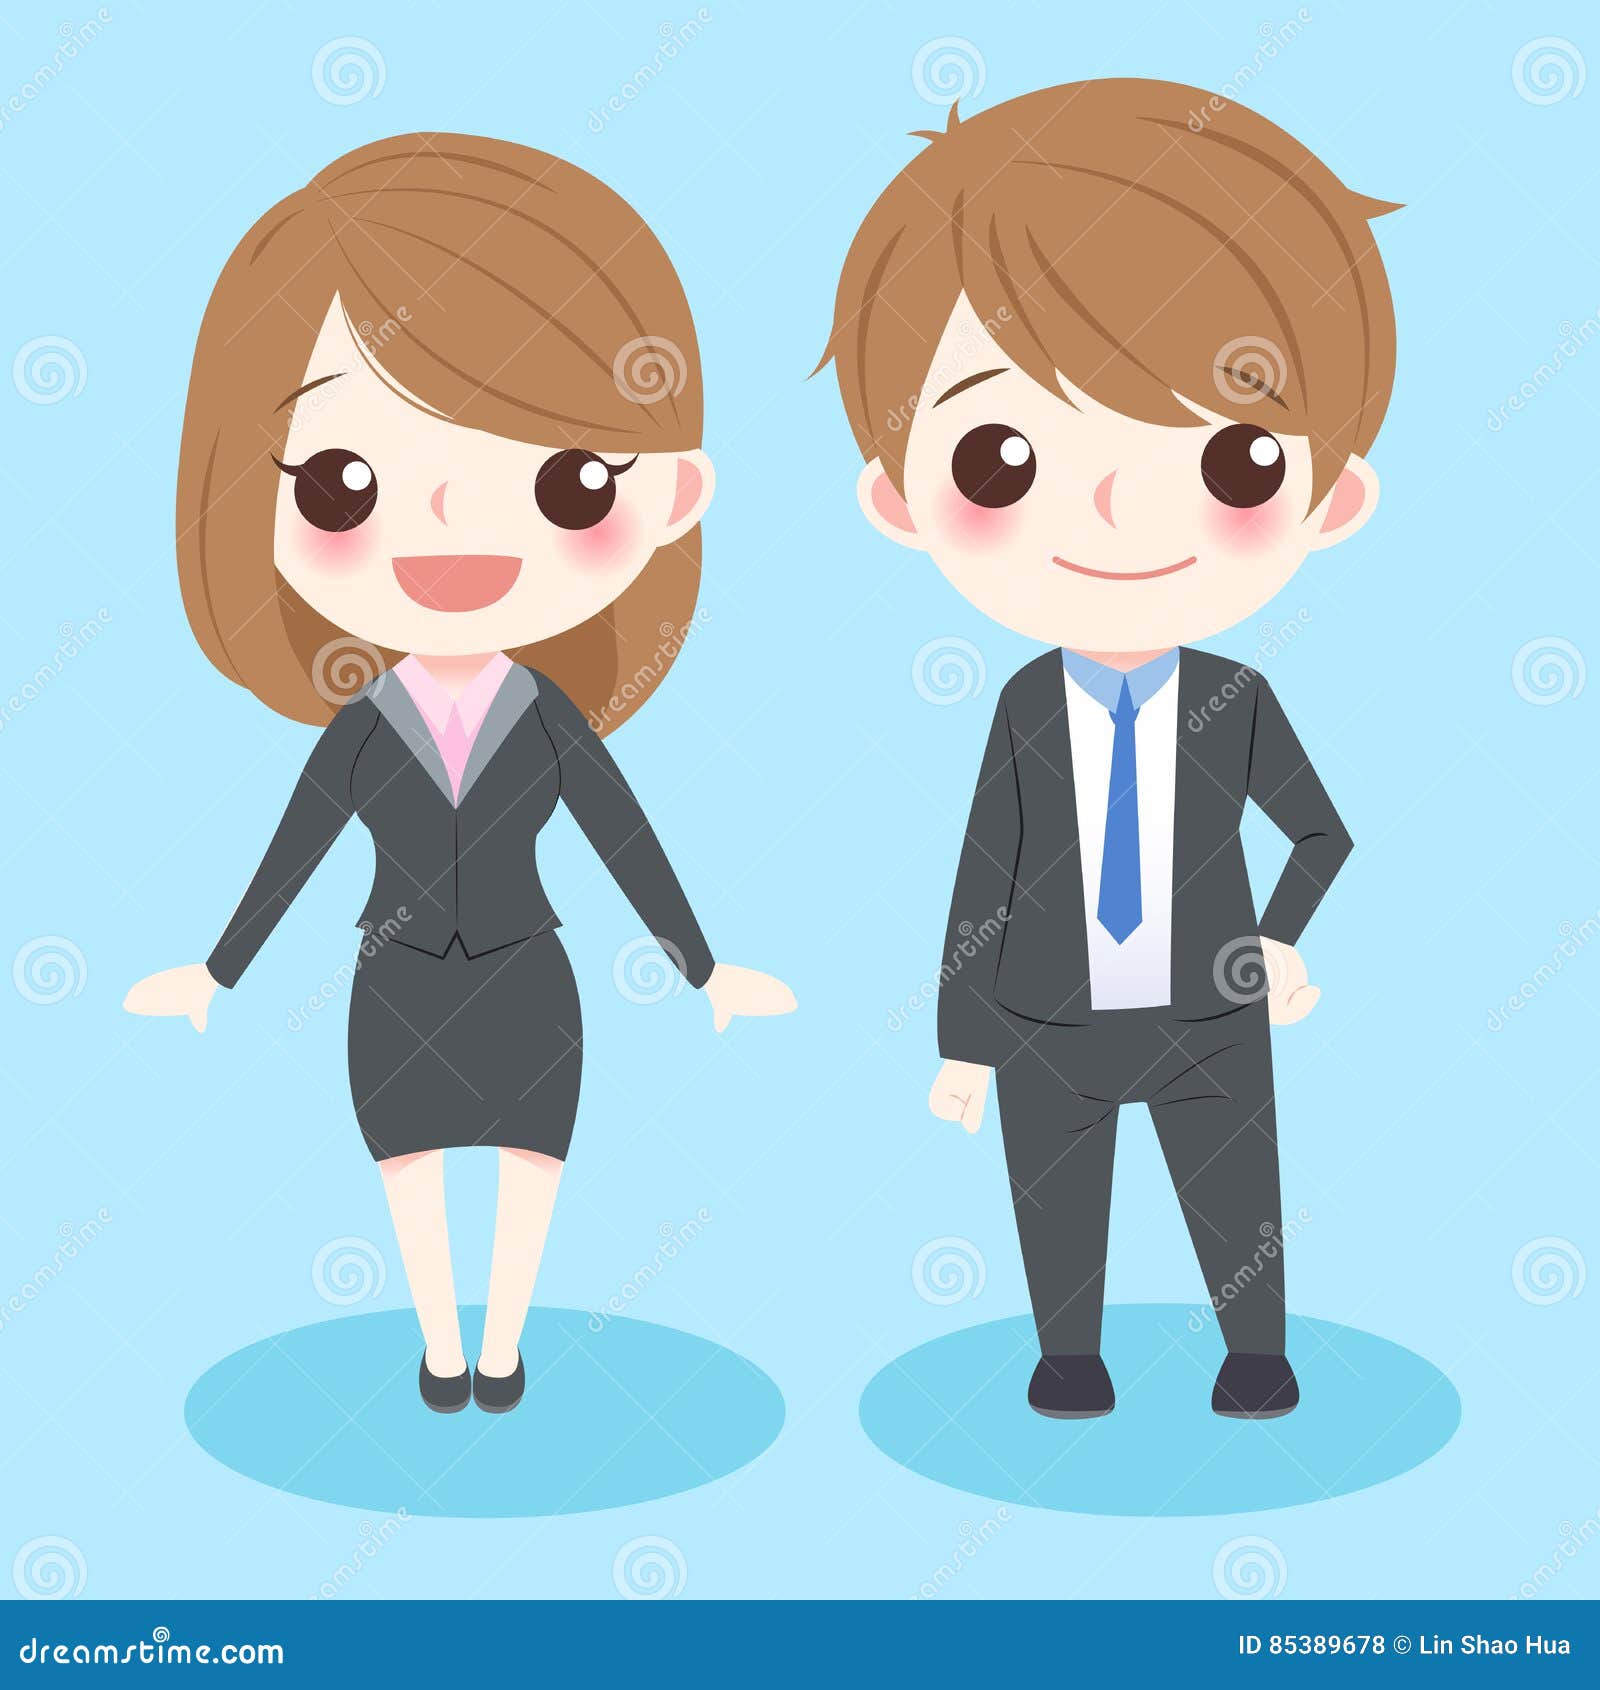 Cute Cartoon Business People Stock Vector - Illustration of cute, lady:  85389678